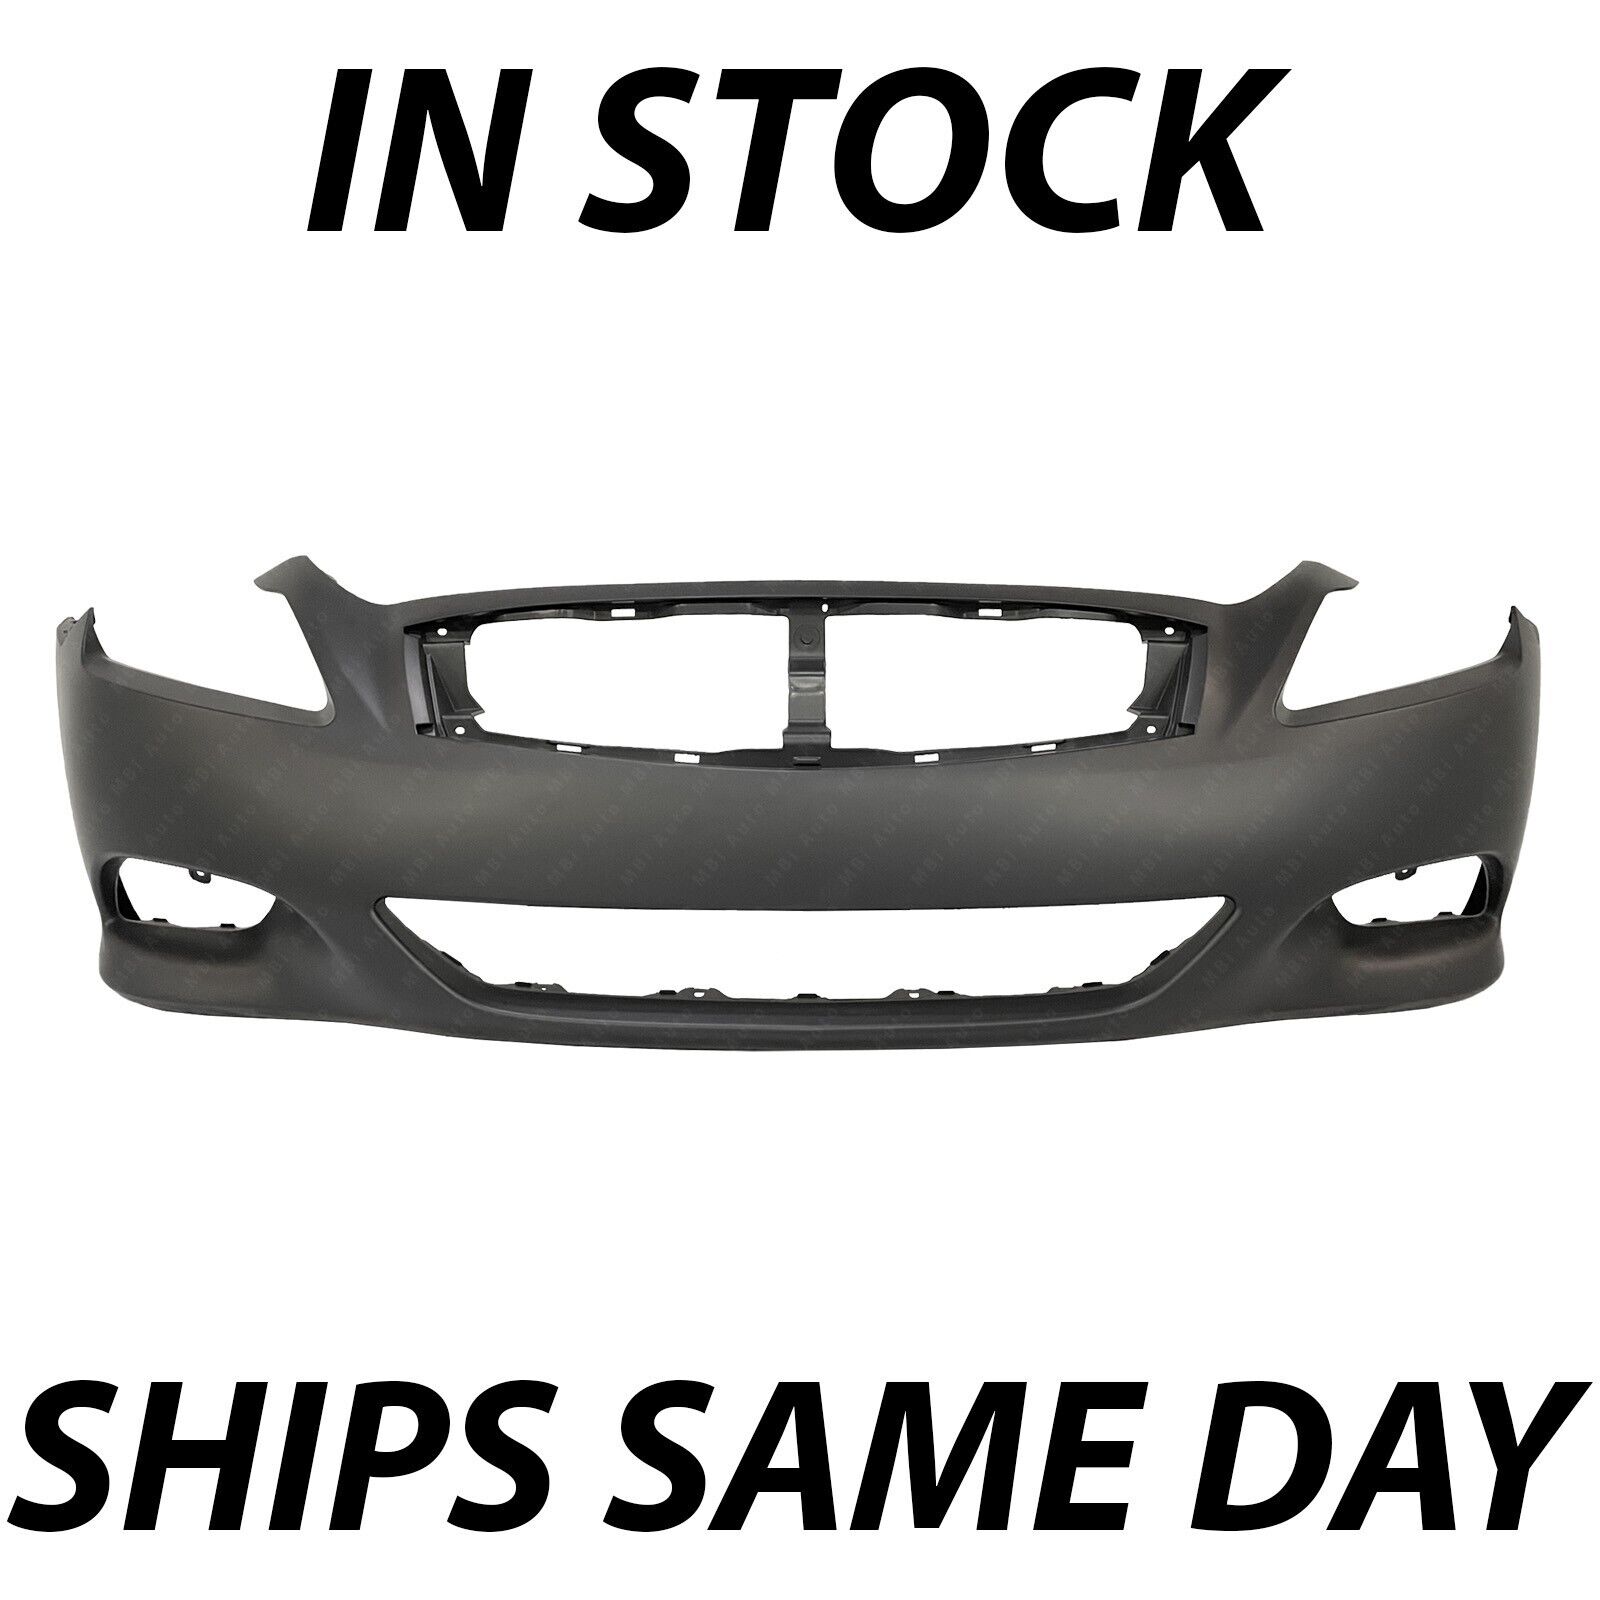 NEW Primered - Front Bumper Cover for 2008-2015 Infiniti G37 Q60 Coupe 08-15